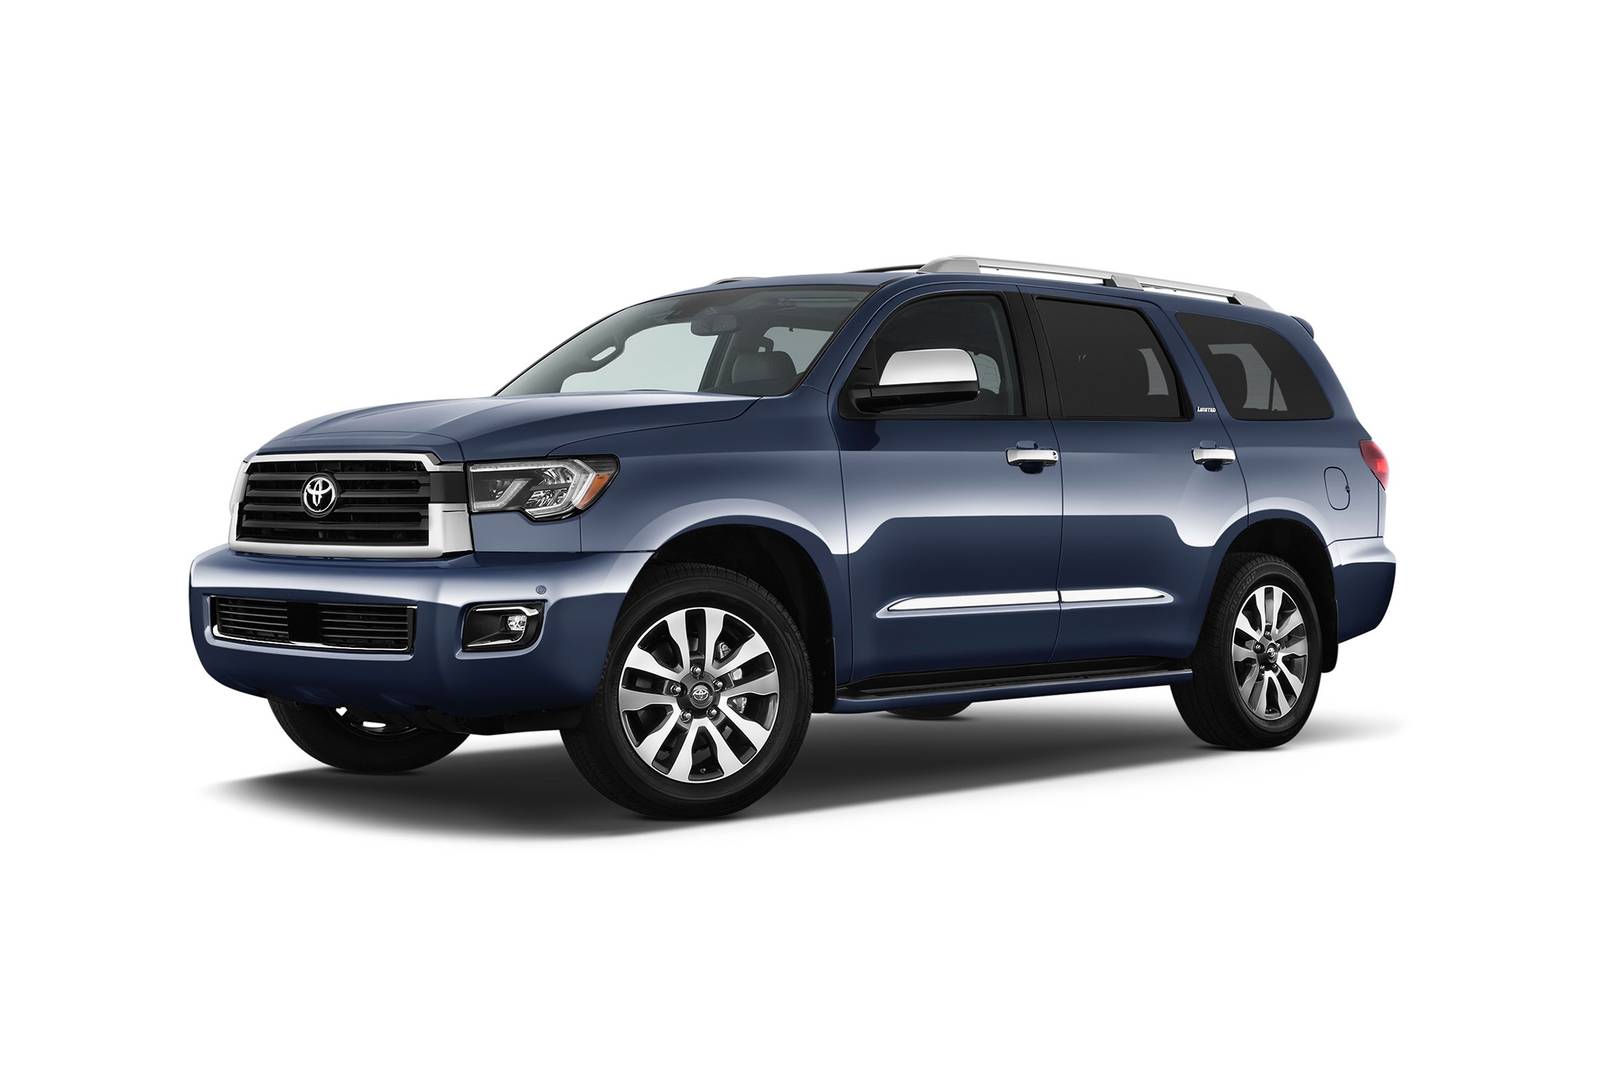 2020 Toyota Sequoia Review & Ratings | Edmunds